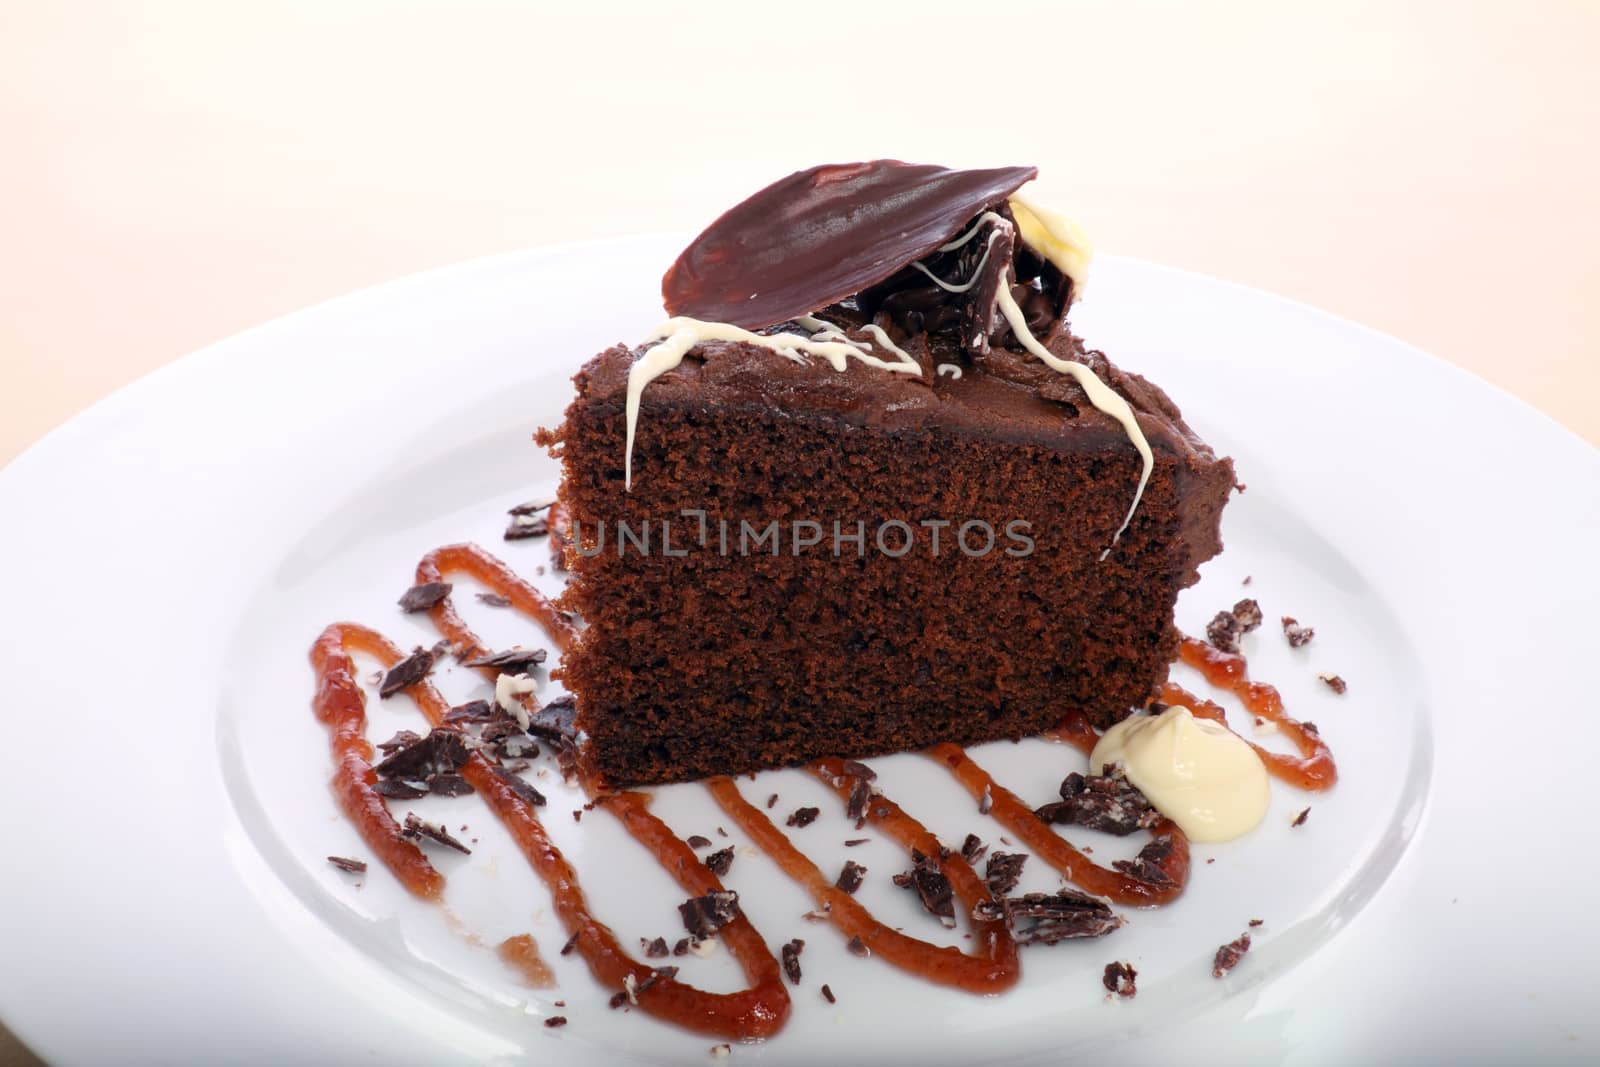 Slice of chocolate cake with choc chips and caramel sauce.